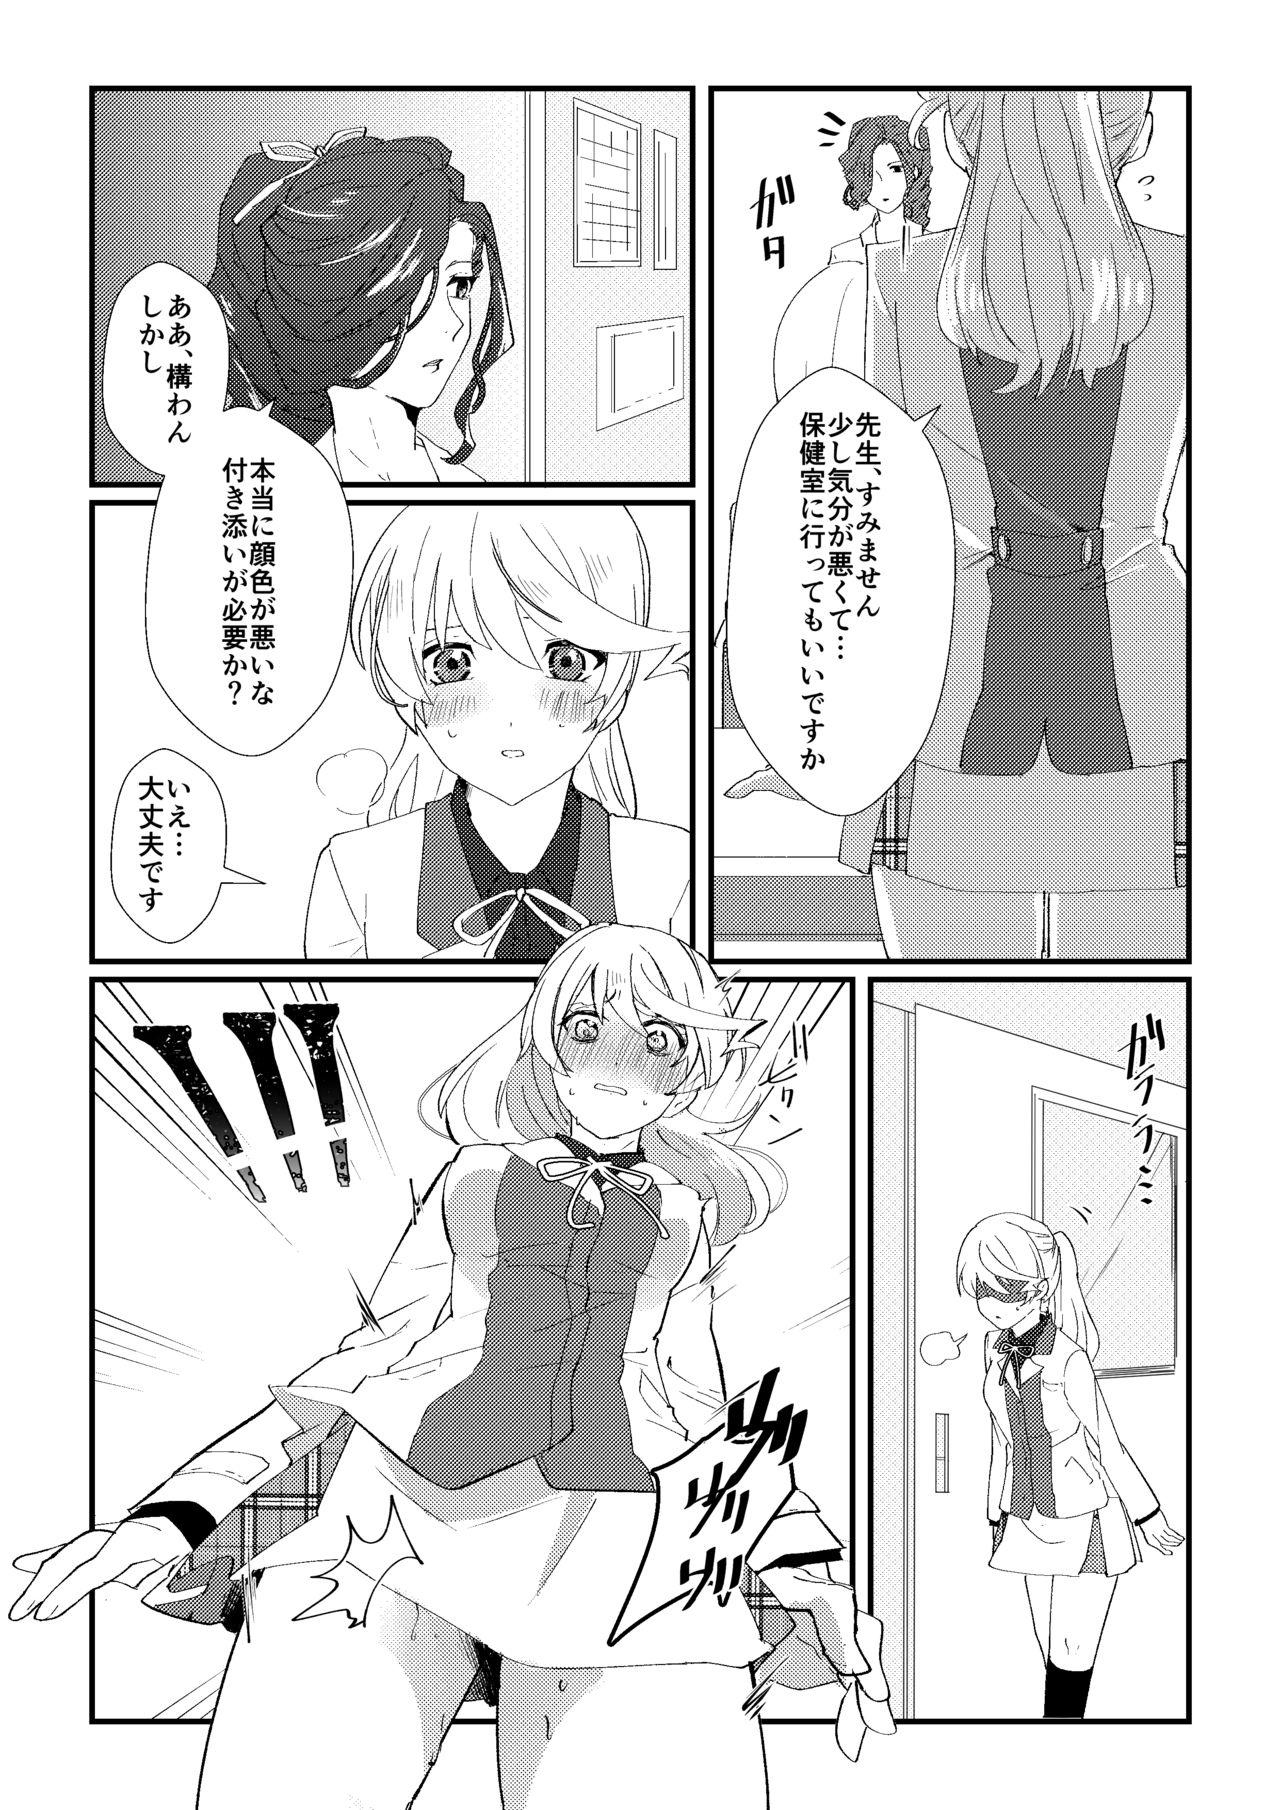 Boots crazy about you - Tales of zestiria Amatuer - Page 3